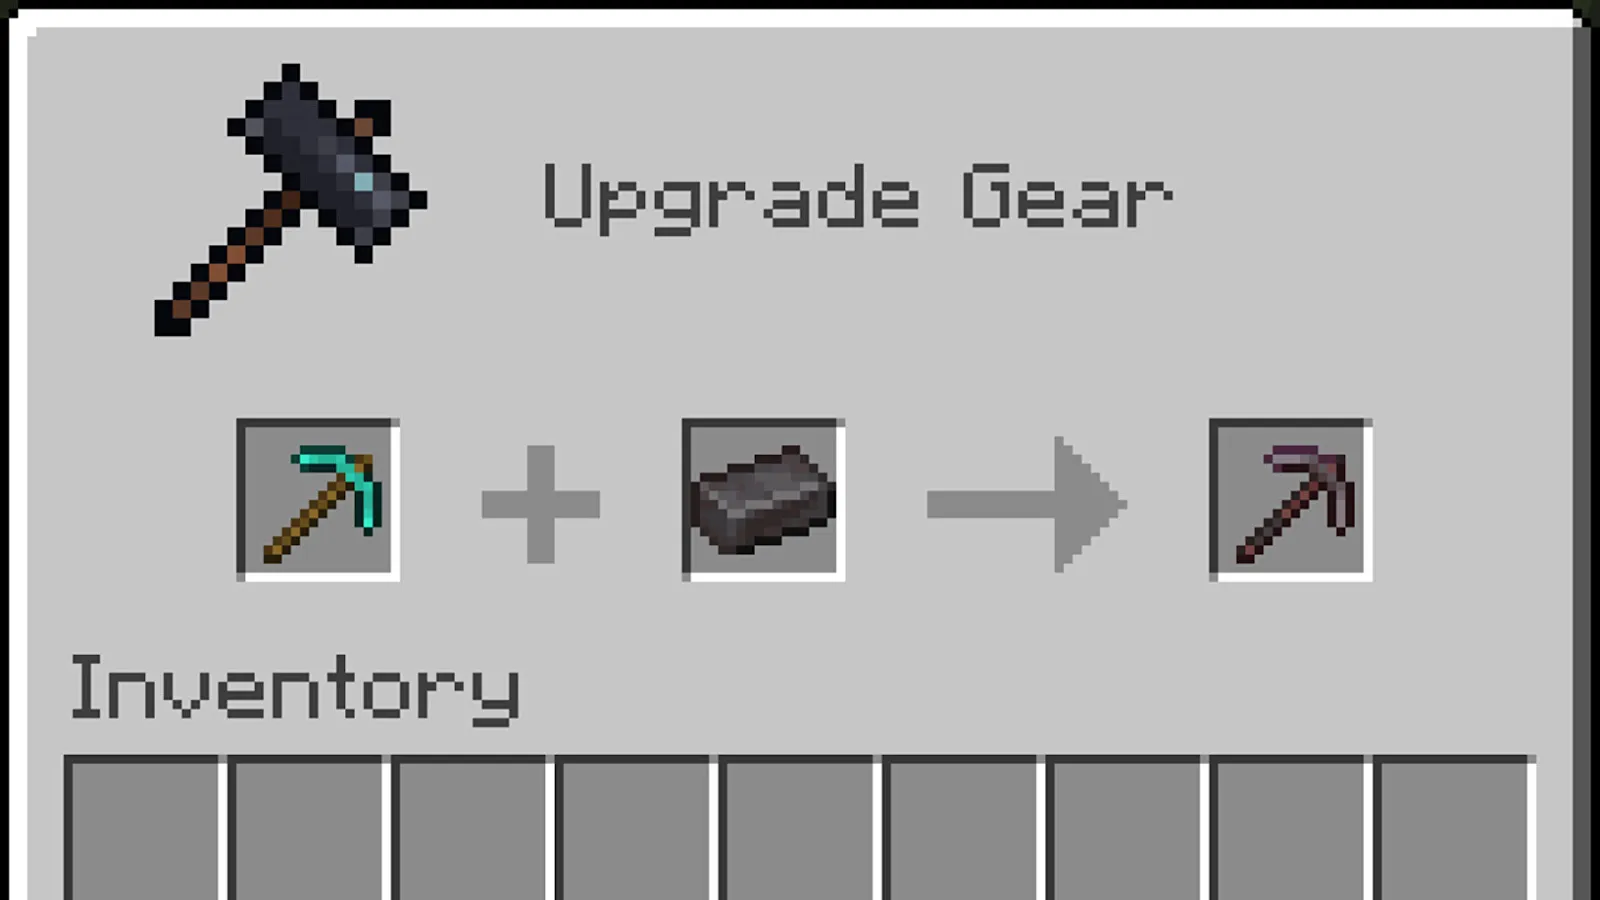 An image of a diamond pickaxe being upgraded to netherite in Minecraft